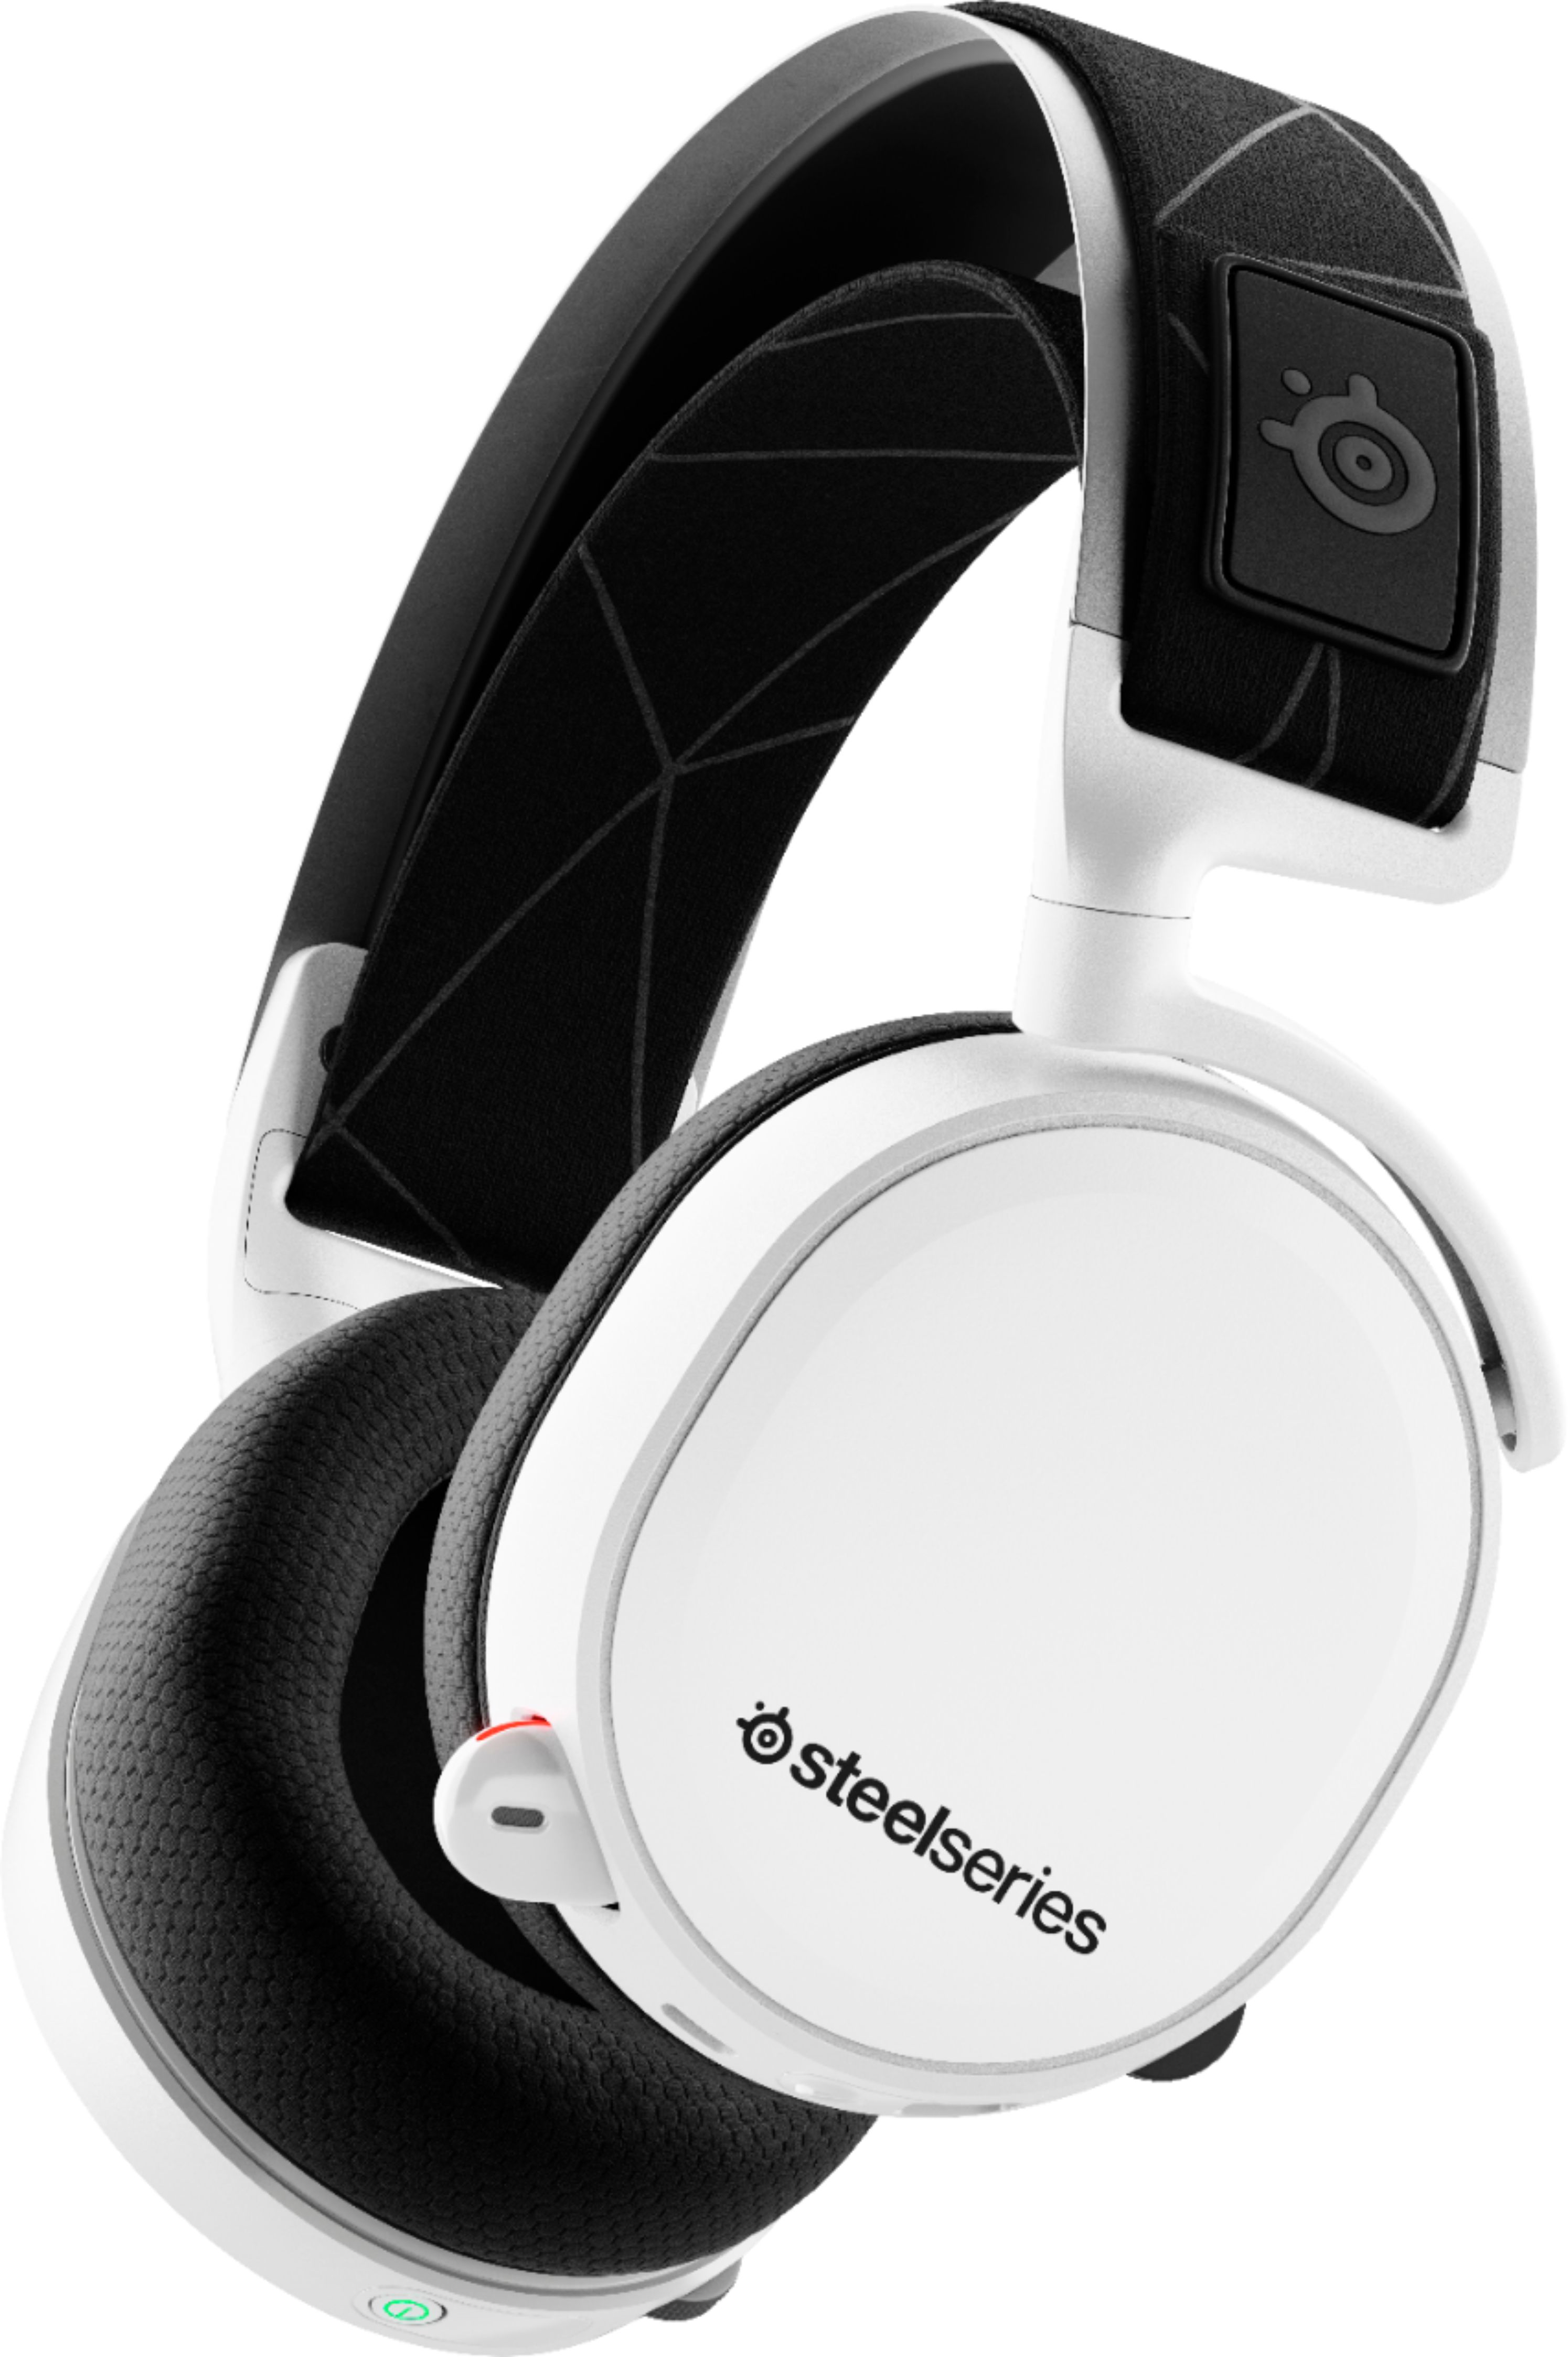 steelseries arctis 7 with ps4